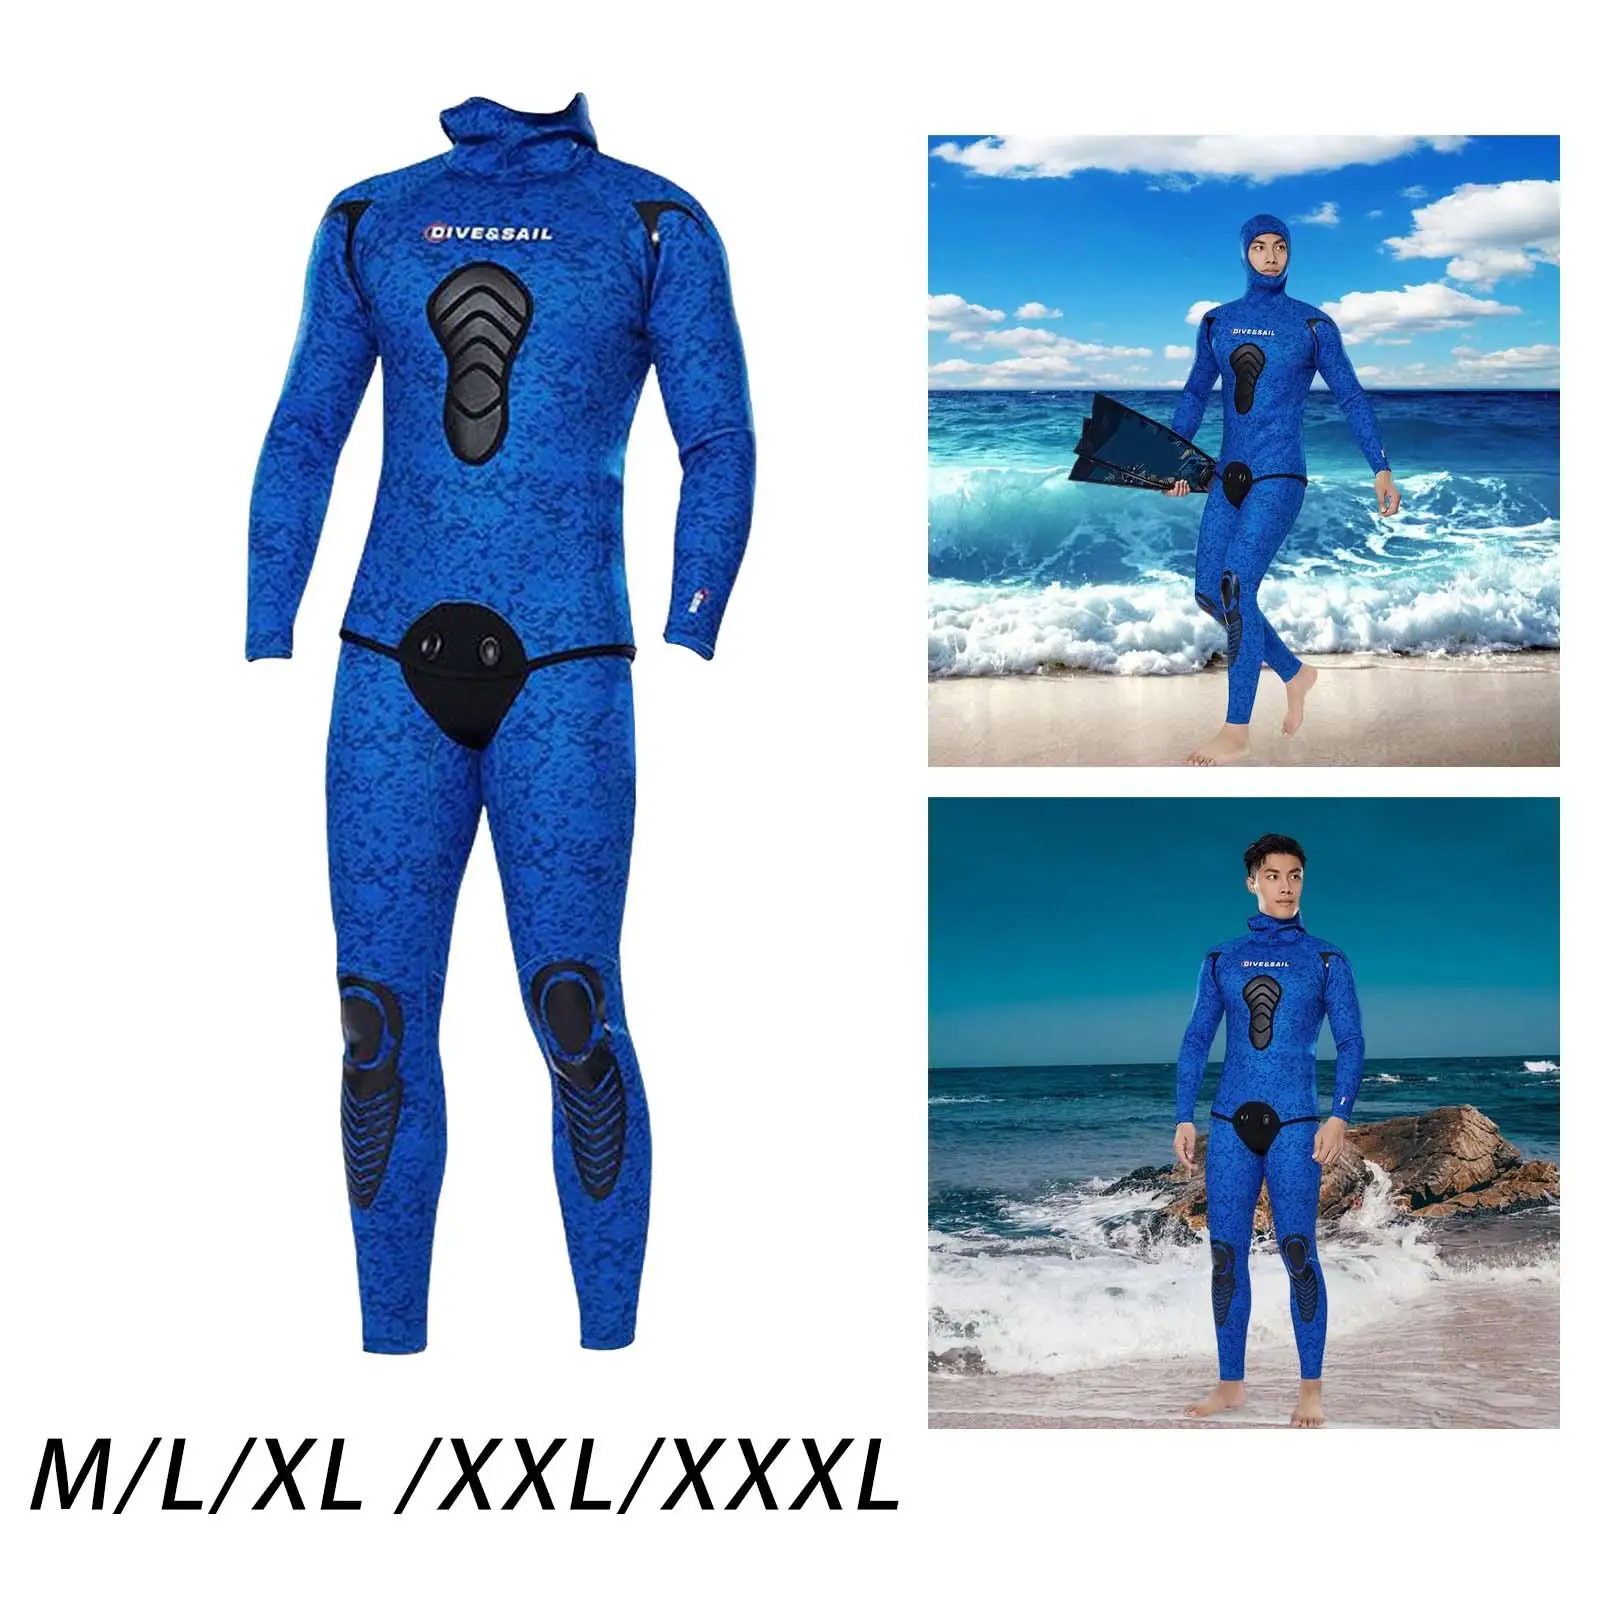 

Mens Wetsuit Scuba Diving Suit Stretch Hooded Neoprene 3mm Dive Suit for Snorkeling Kayaking Swimming Underwater Spearfishing